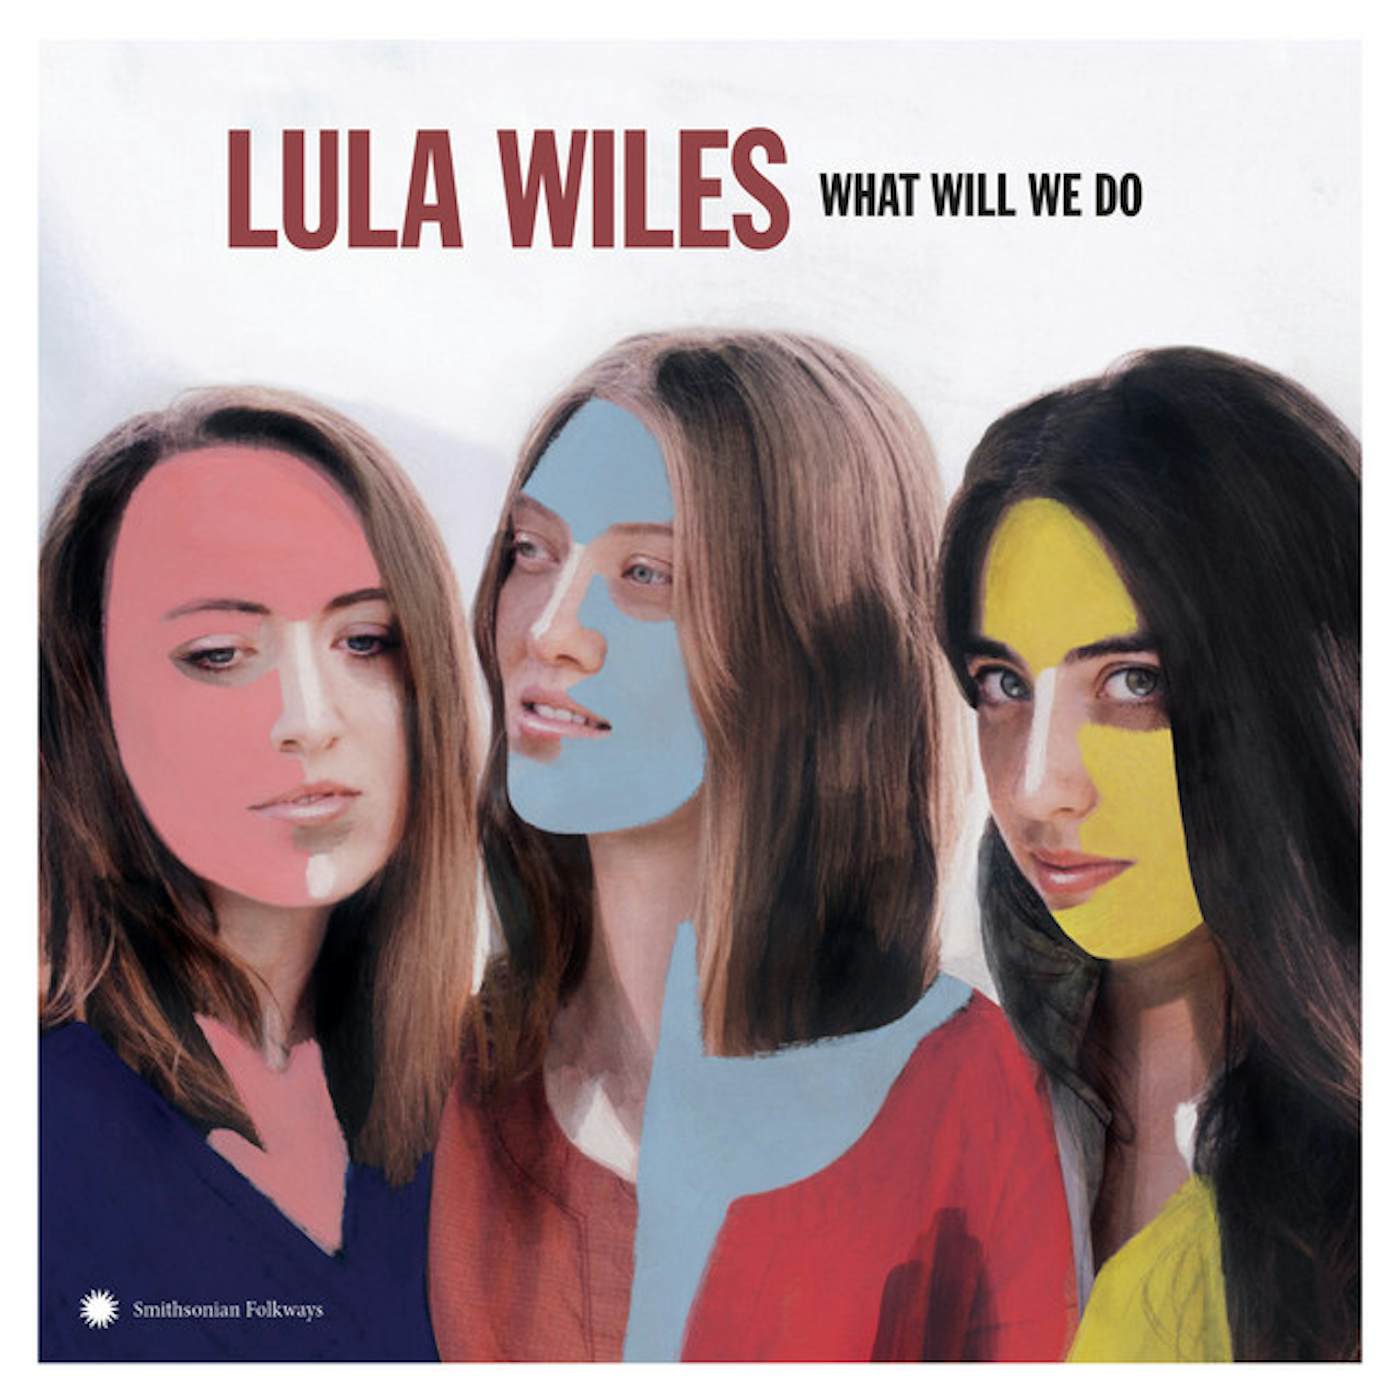 Lula Wiles WHAT WILL WE DO CD